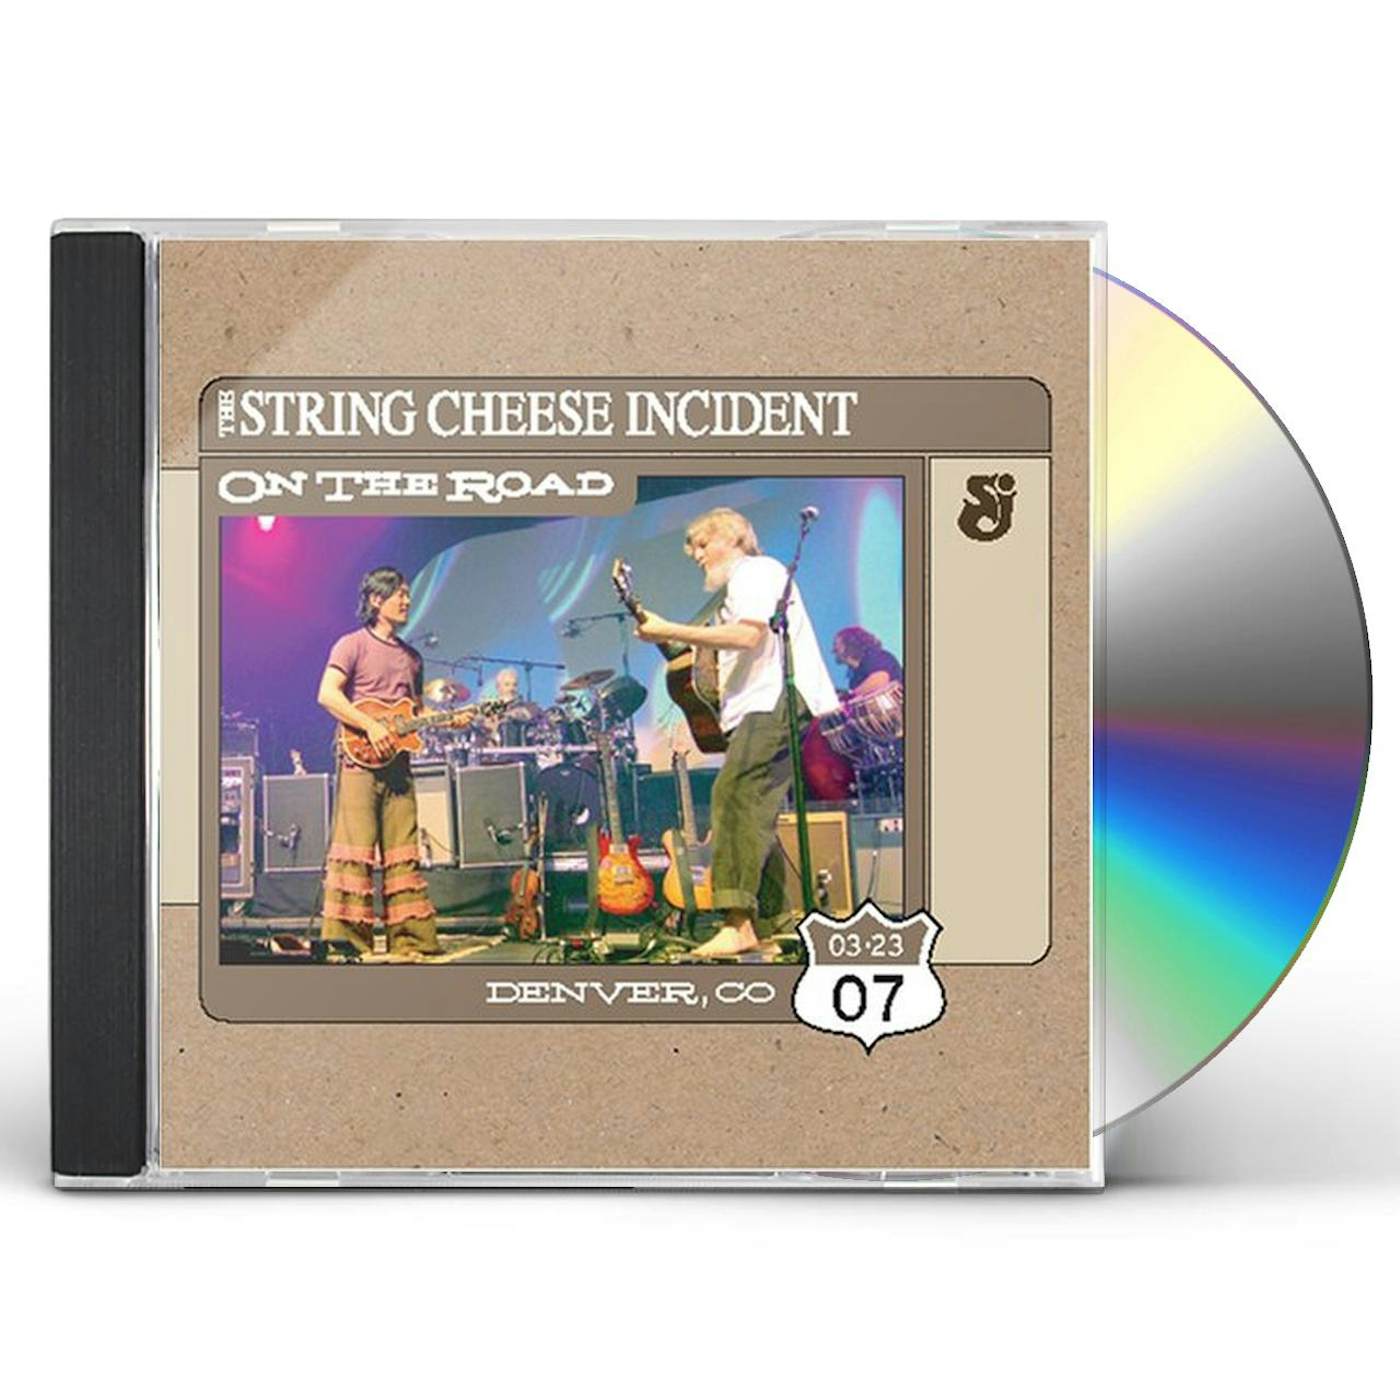 The String Cheese Incident ON THE ROAD: DENVER CO 3-23-7 CD